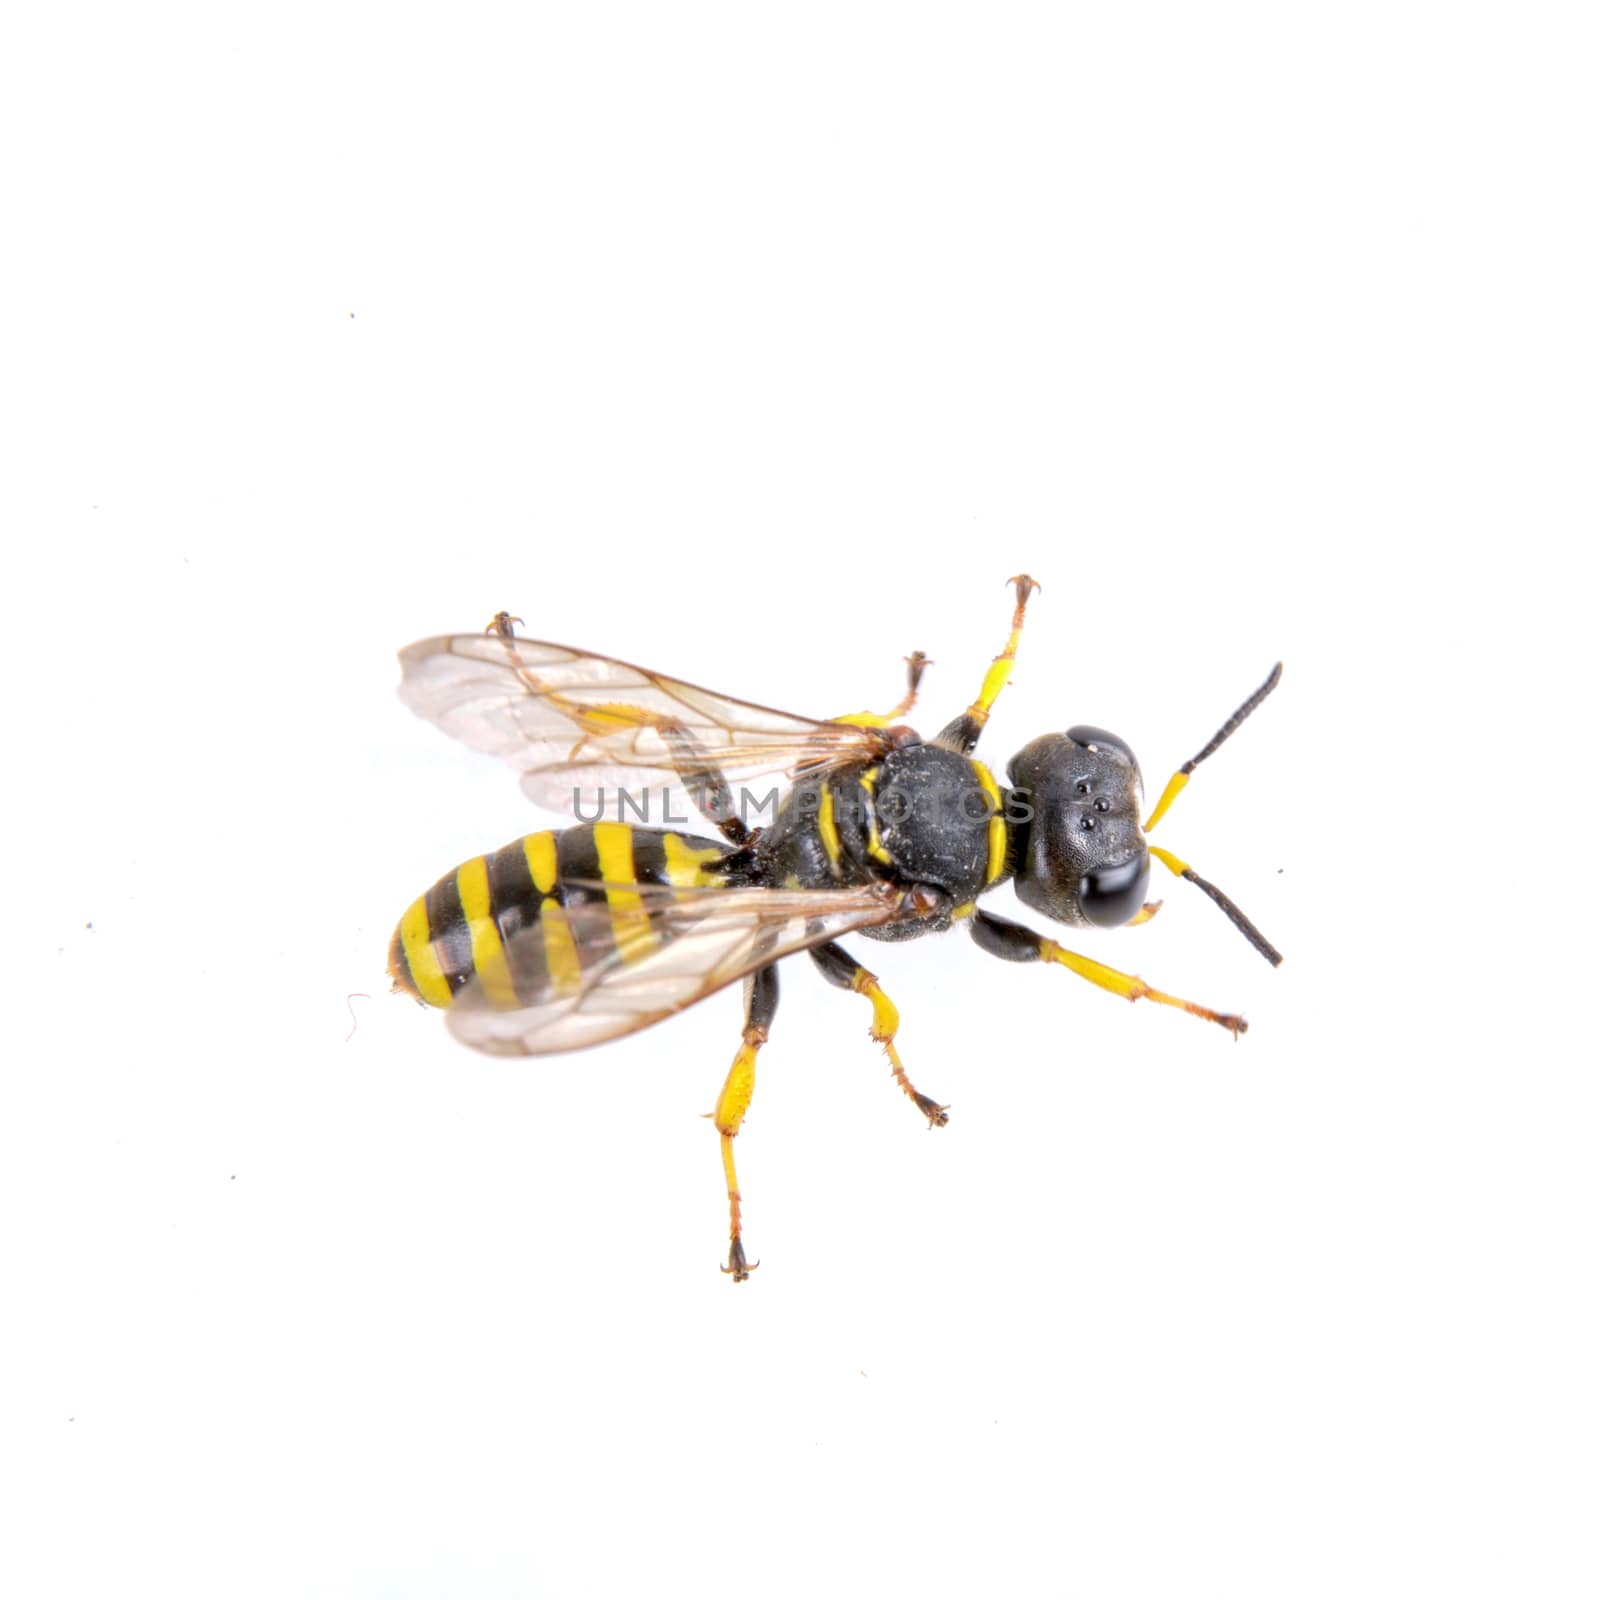 Black insect whith yellow stripes isolated on the white background